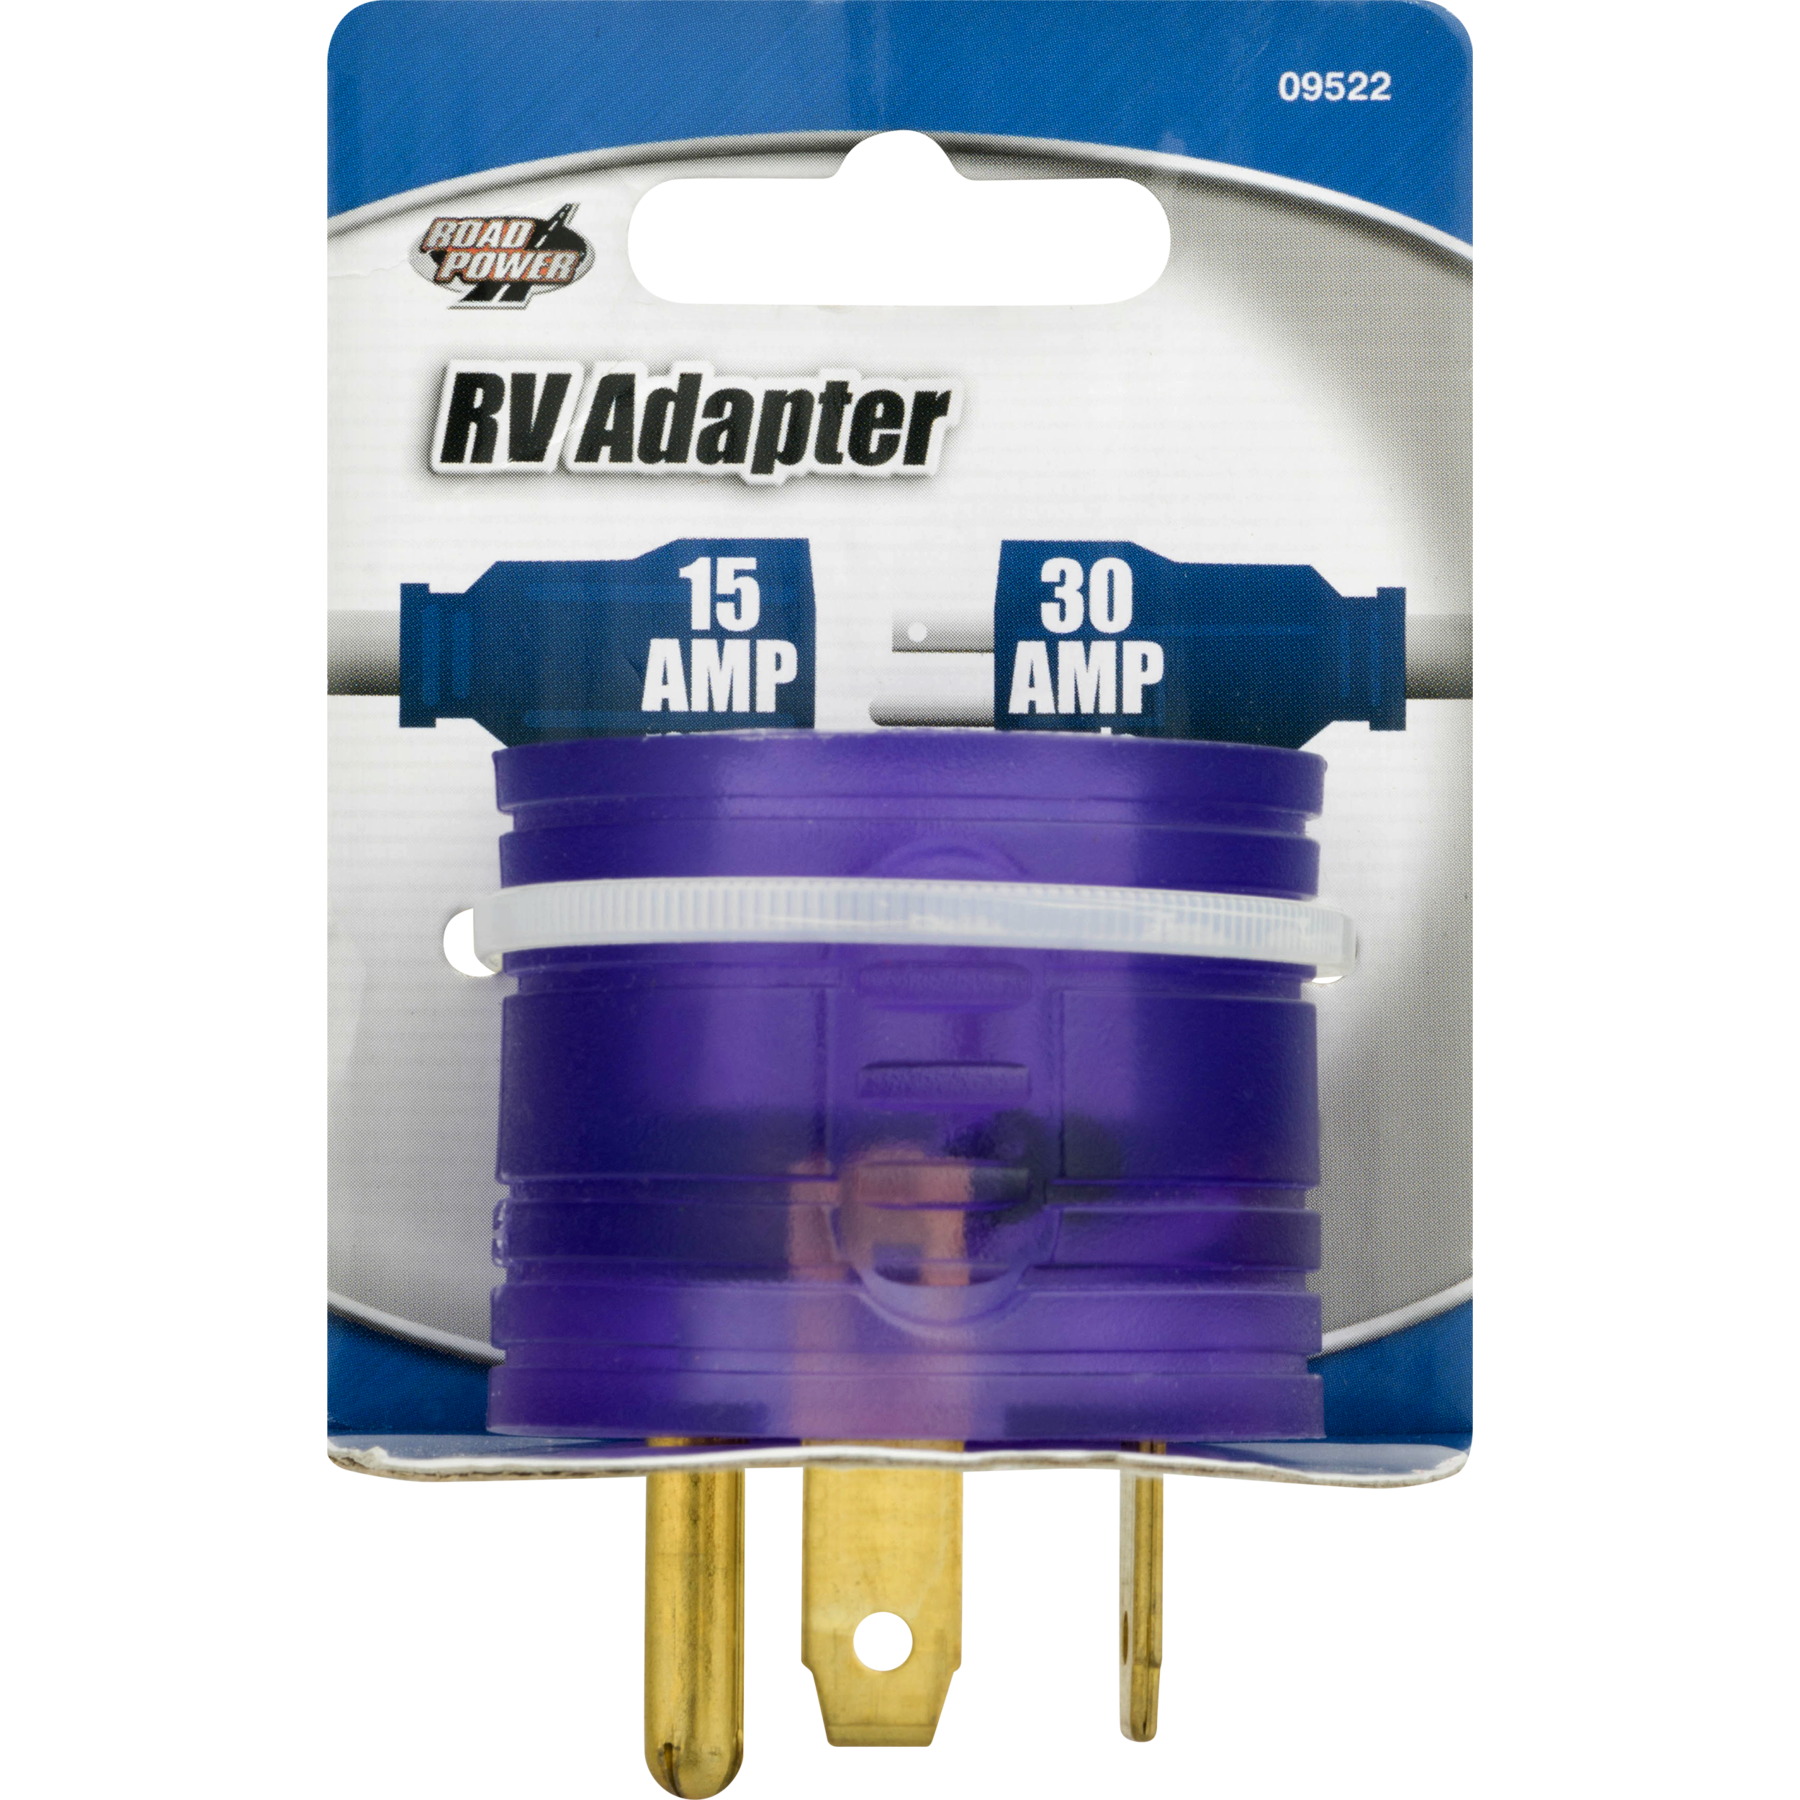 Road Power 30-15-Amp RV Power Adapter - image 4 of 5